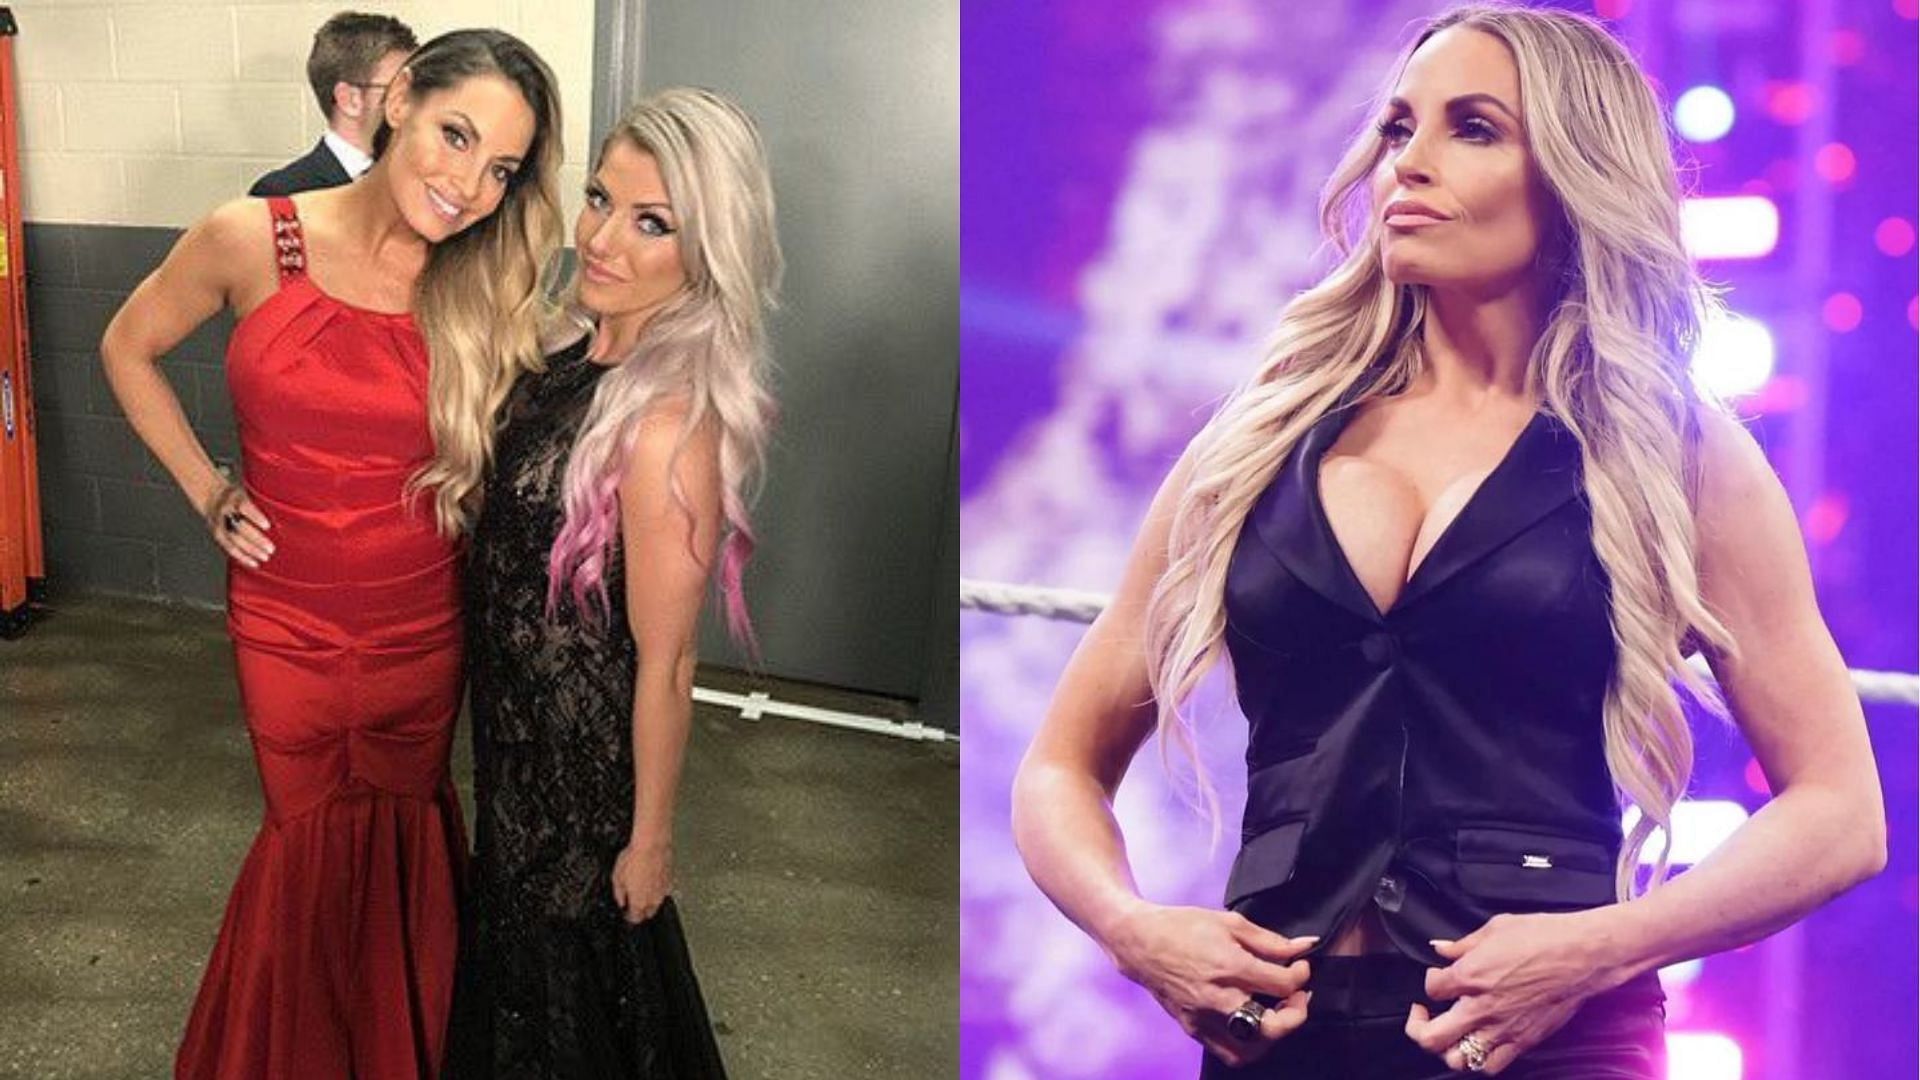 Trish Stratus is currently feuding with Becky Lynch, while Alexa Bliss remains inactive 